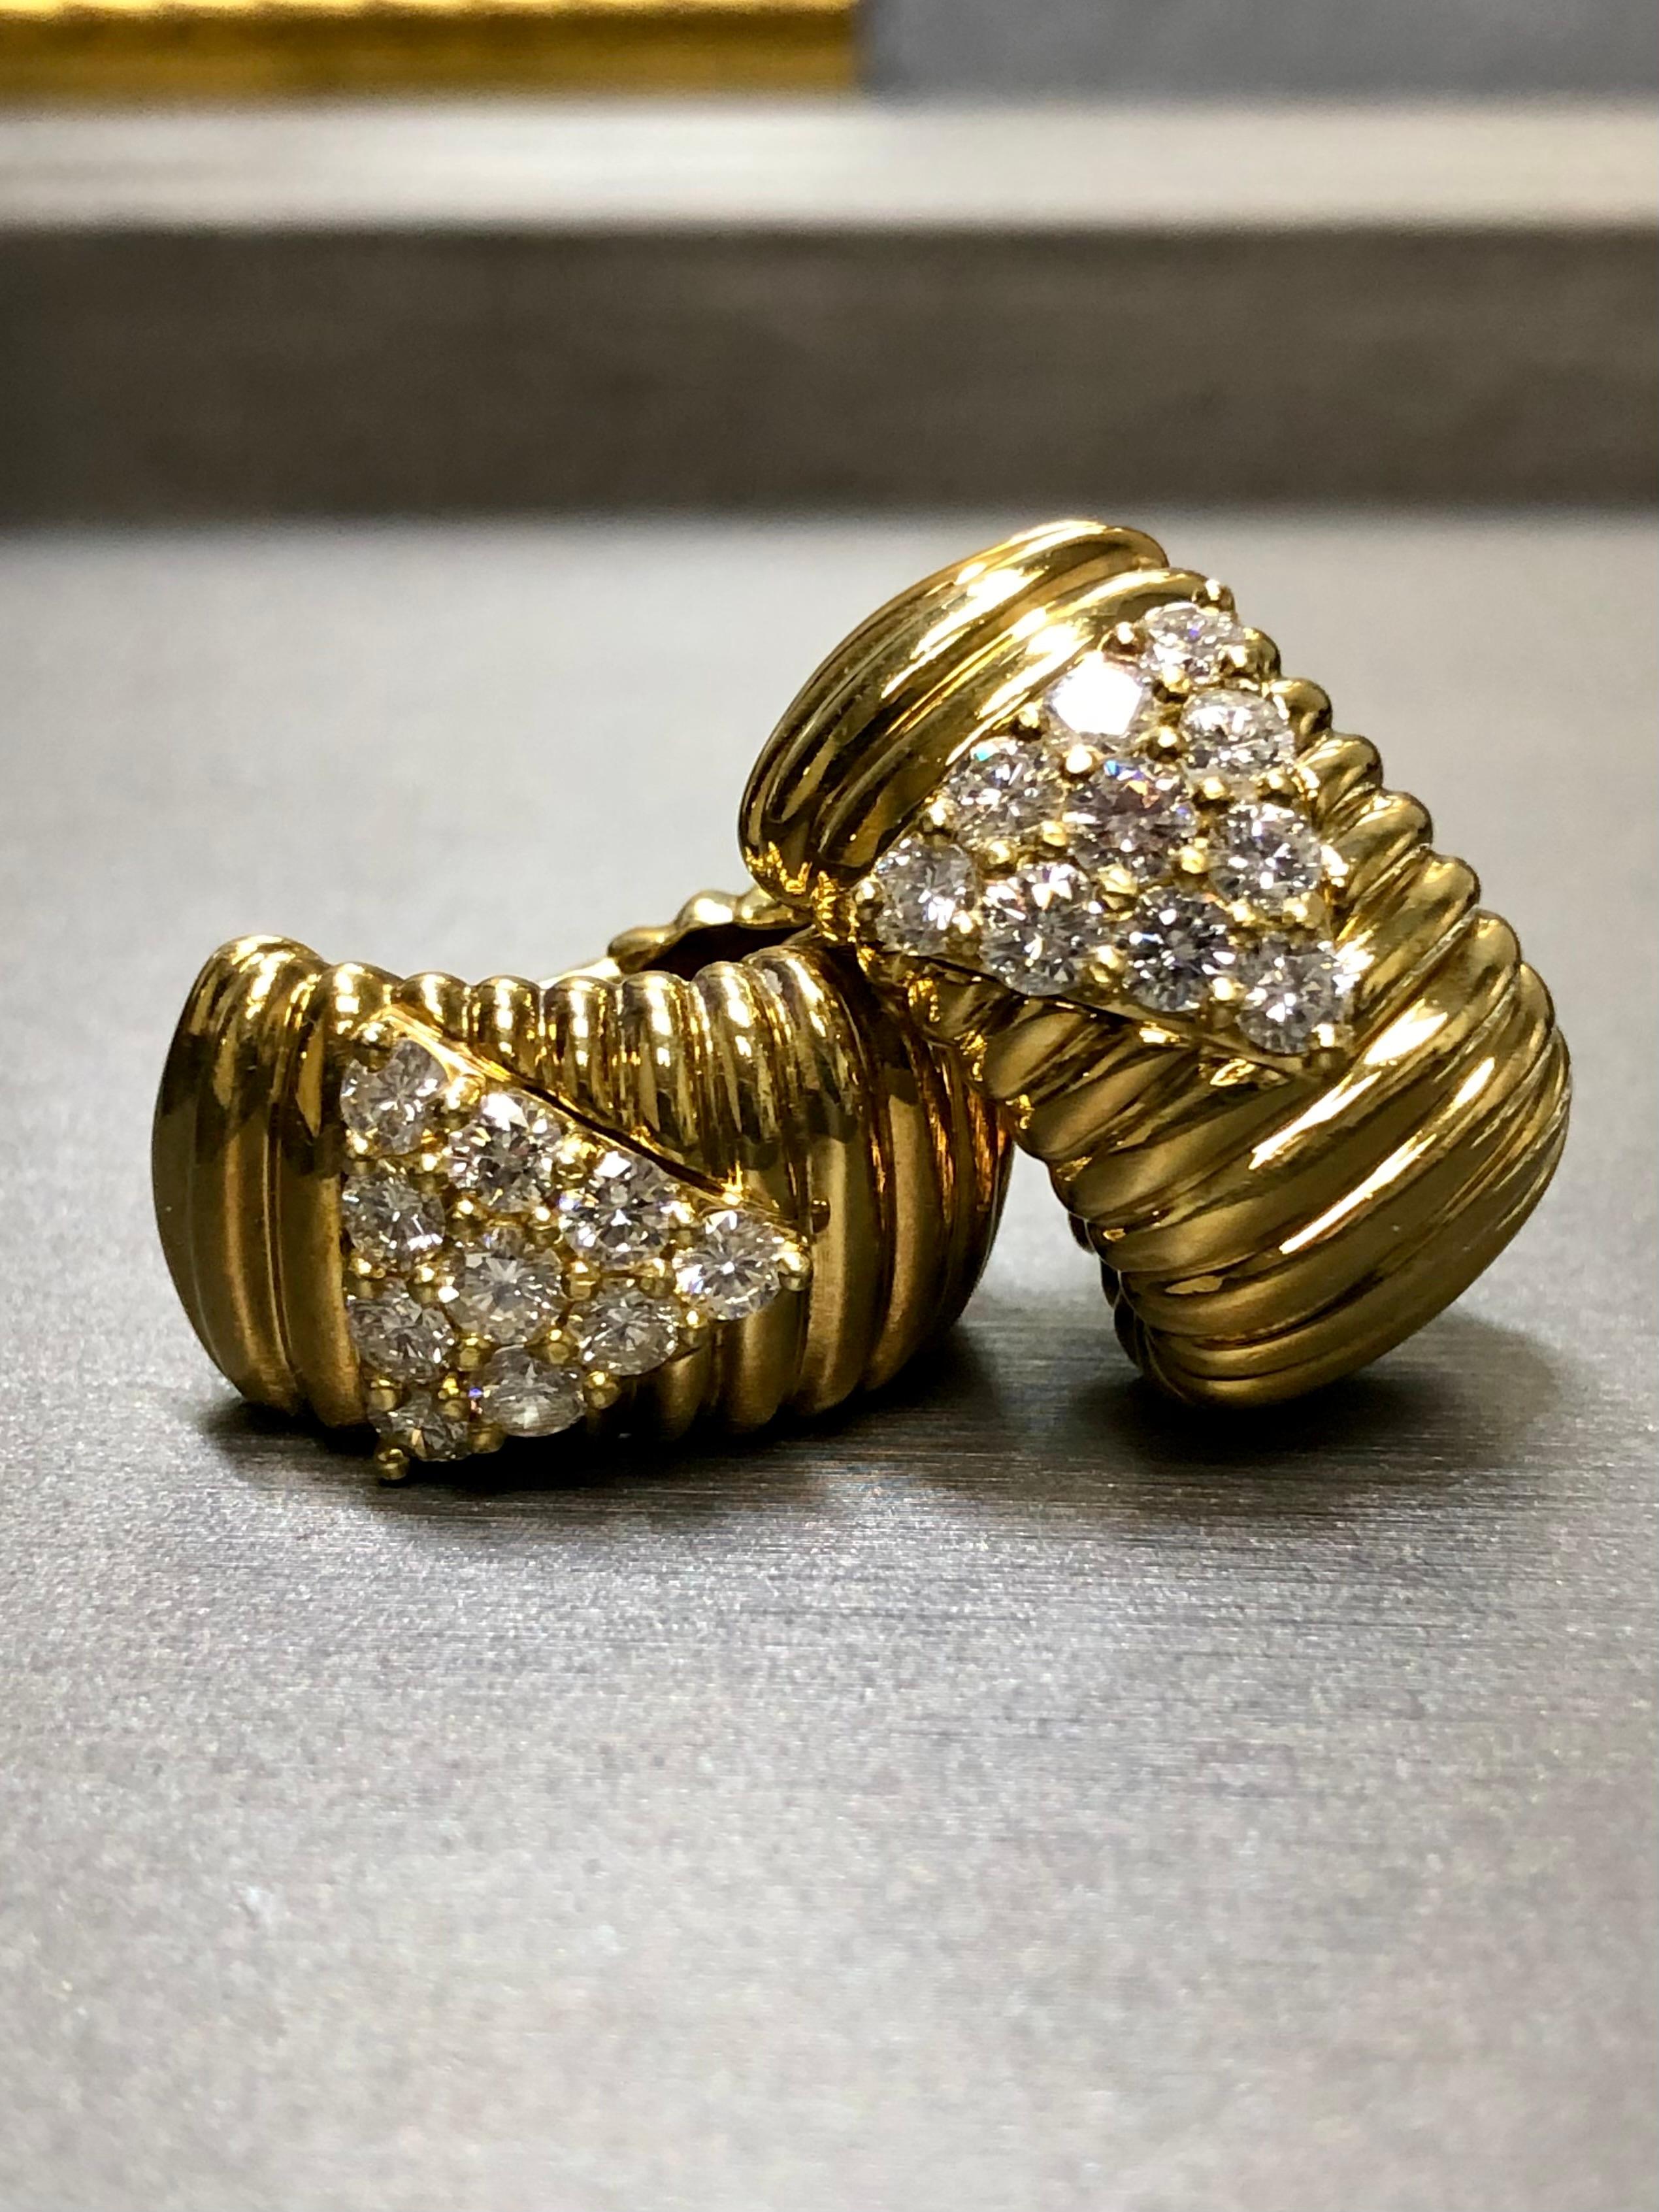 A fabulous pair of diamond huggies done by none other than Jose Hess. Anyone familiar with that name knows that no expense was spared in the crafting of his piece. And now that he is no longer with us, these pieces are going to become more and more